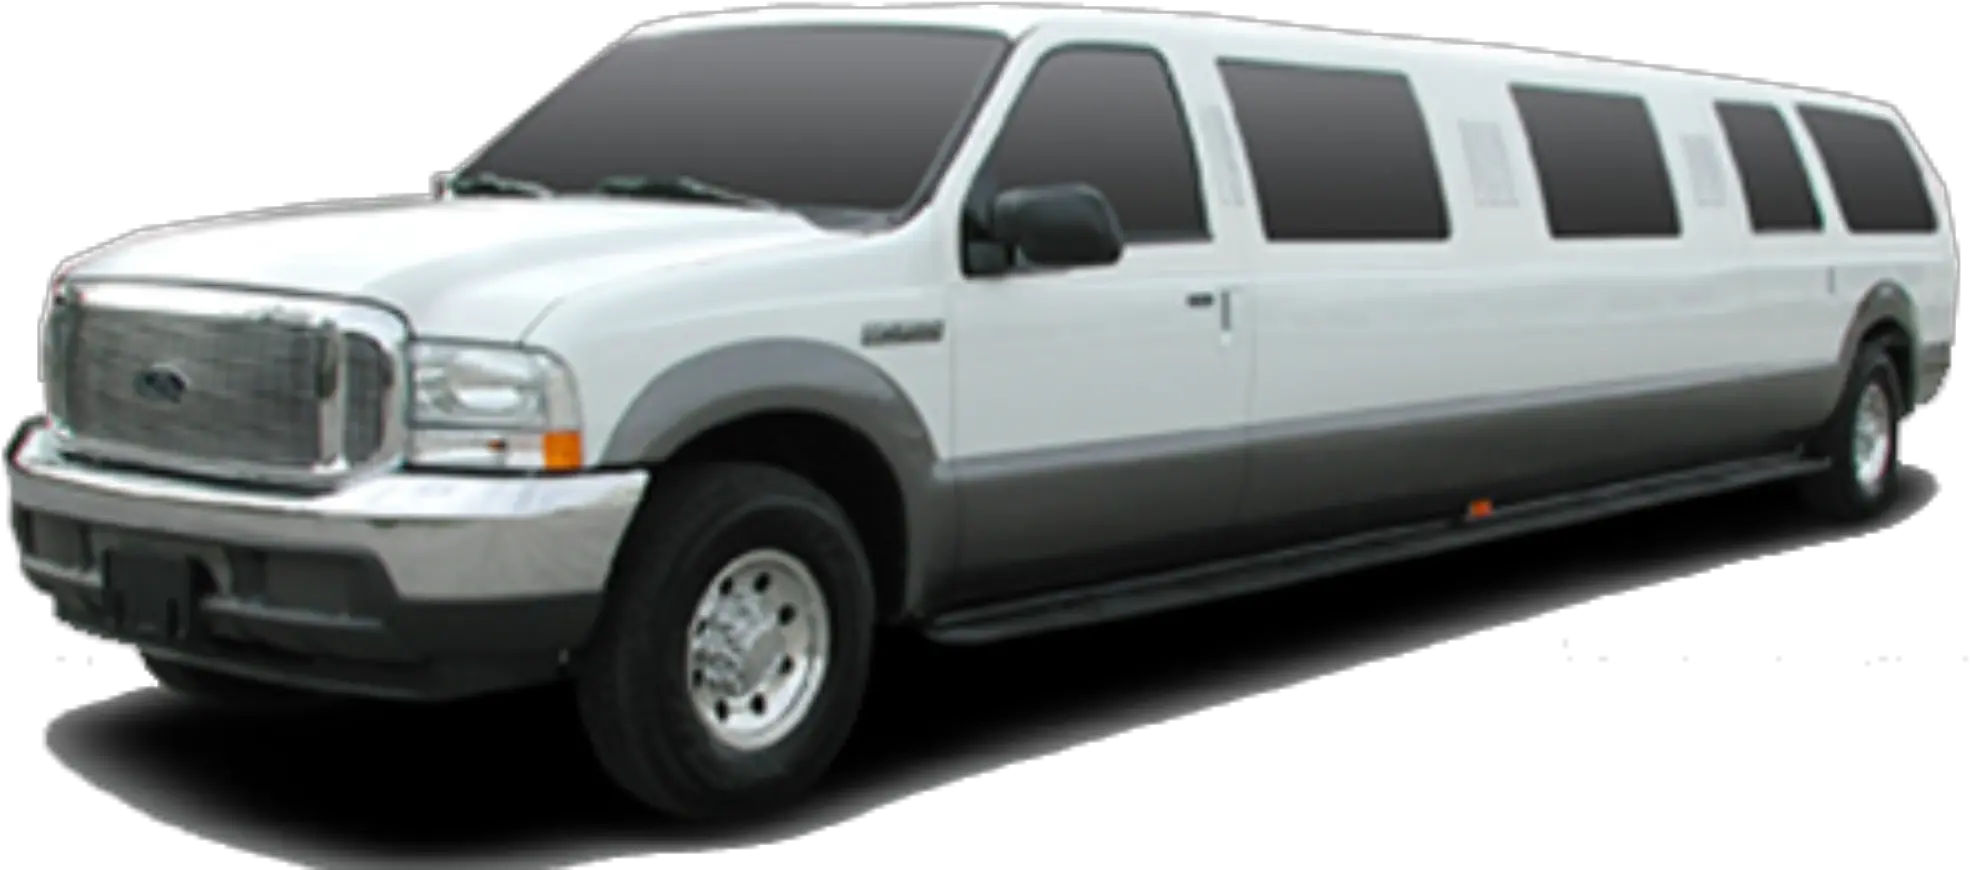 Download Cropped Ford Excursion Limousine 1 Stretch Suv Stretch Suv Ford Excursion Png Ford Png